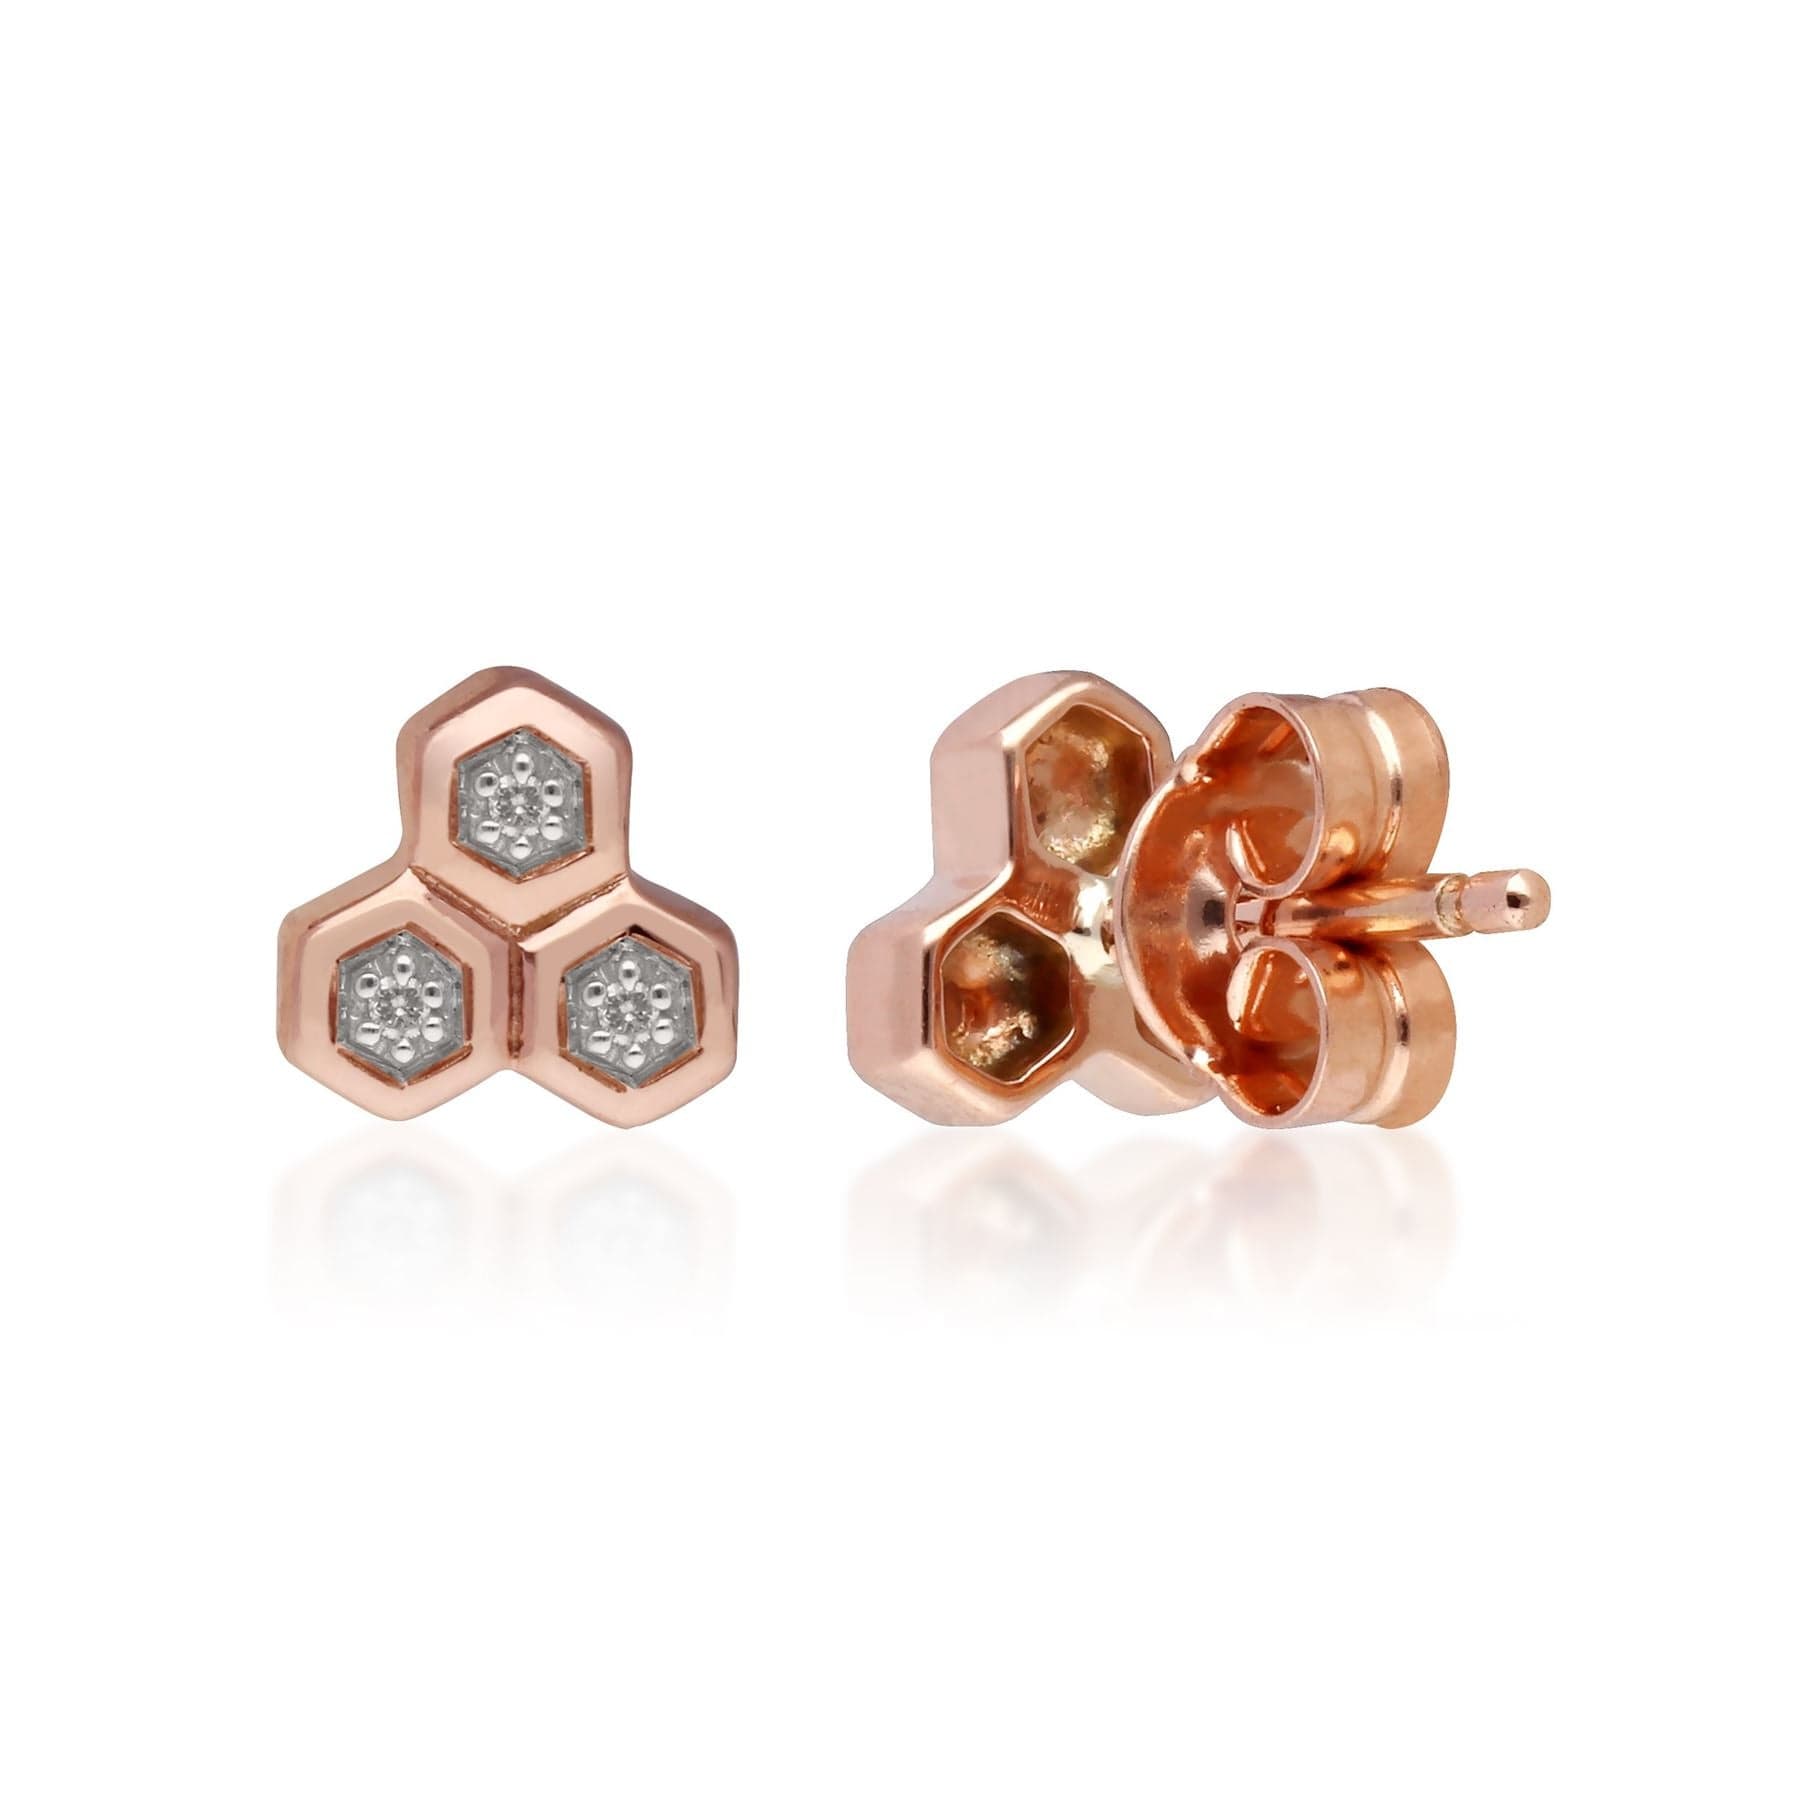 191E0397029 Diamond Trilogy Mismatched Stud Earrings in 9ct Rose Gold 4